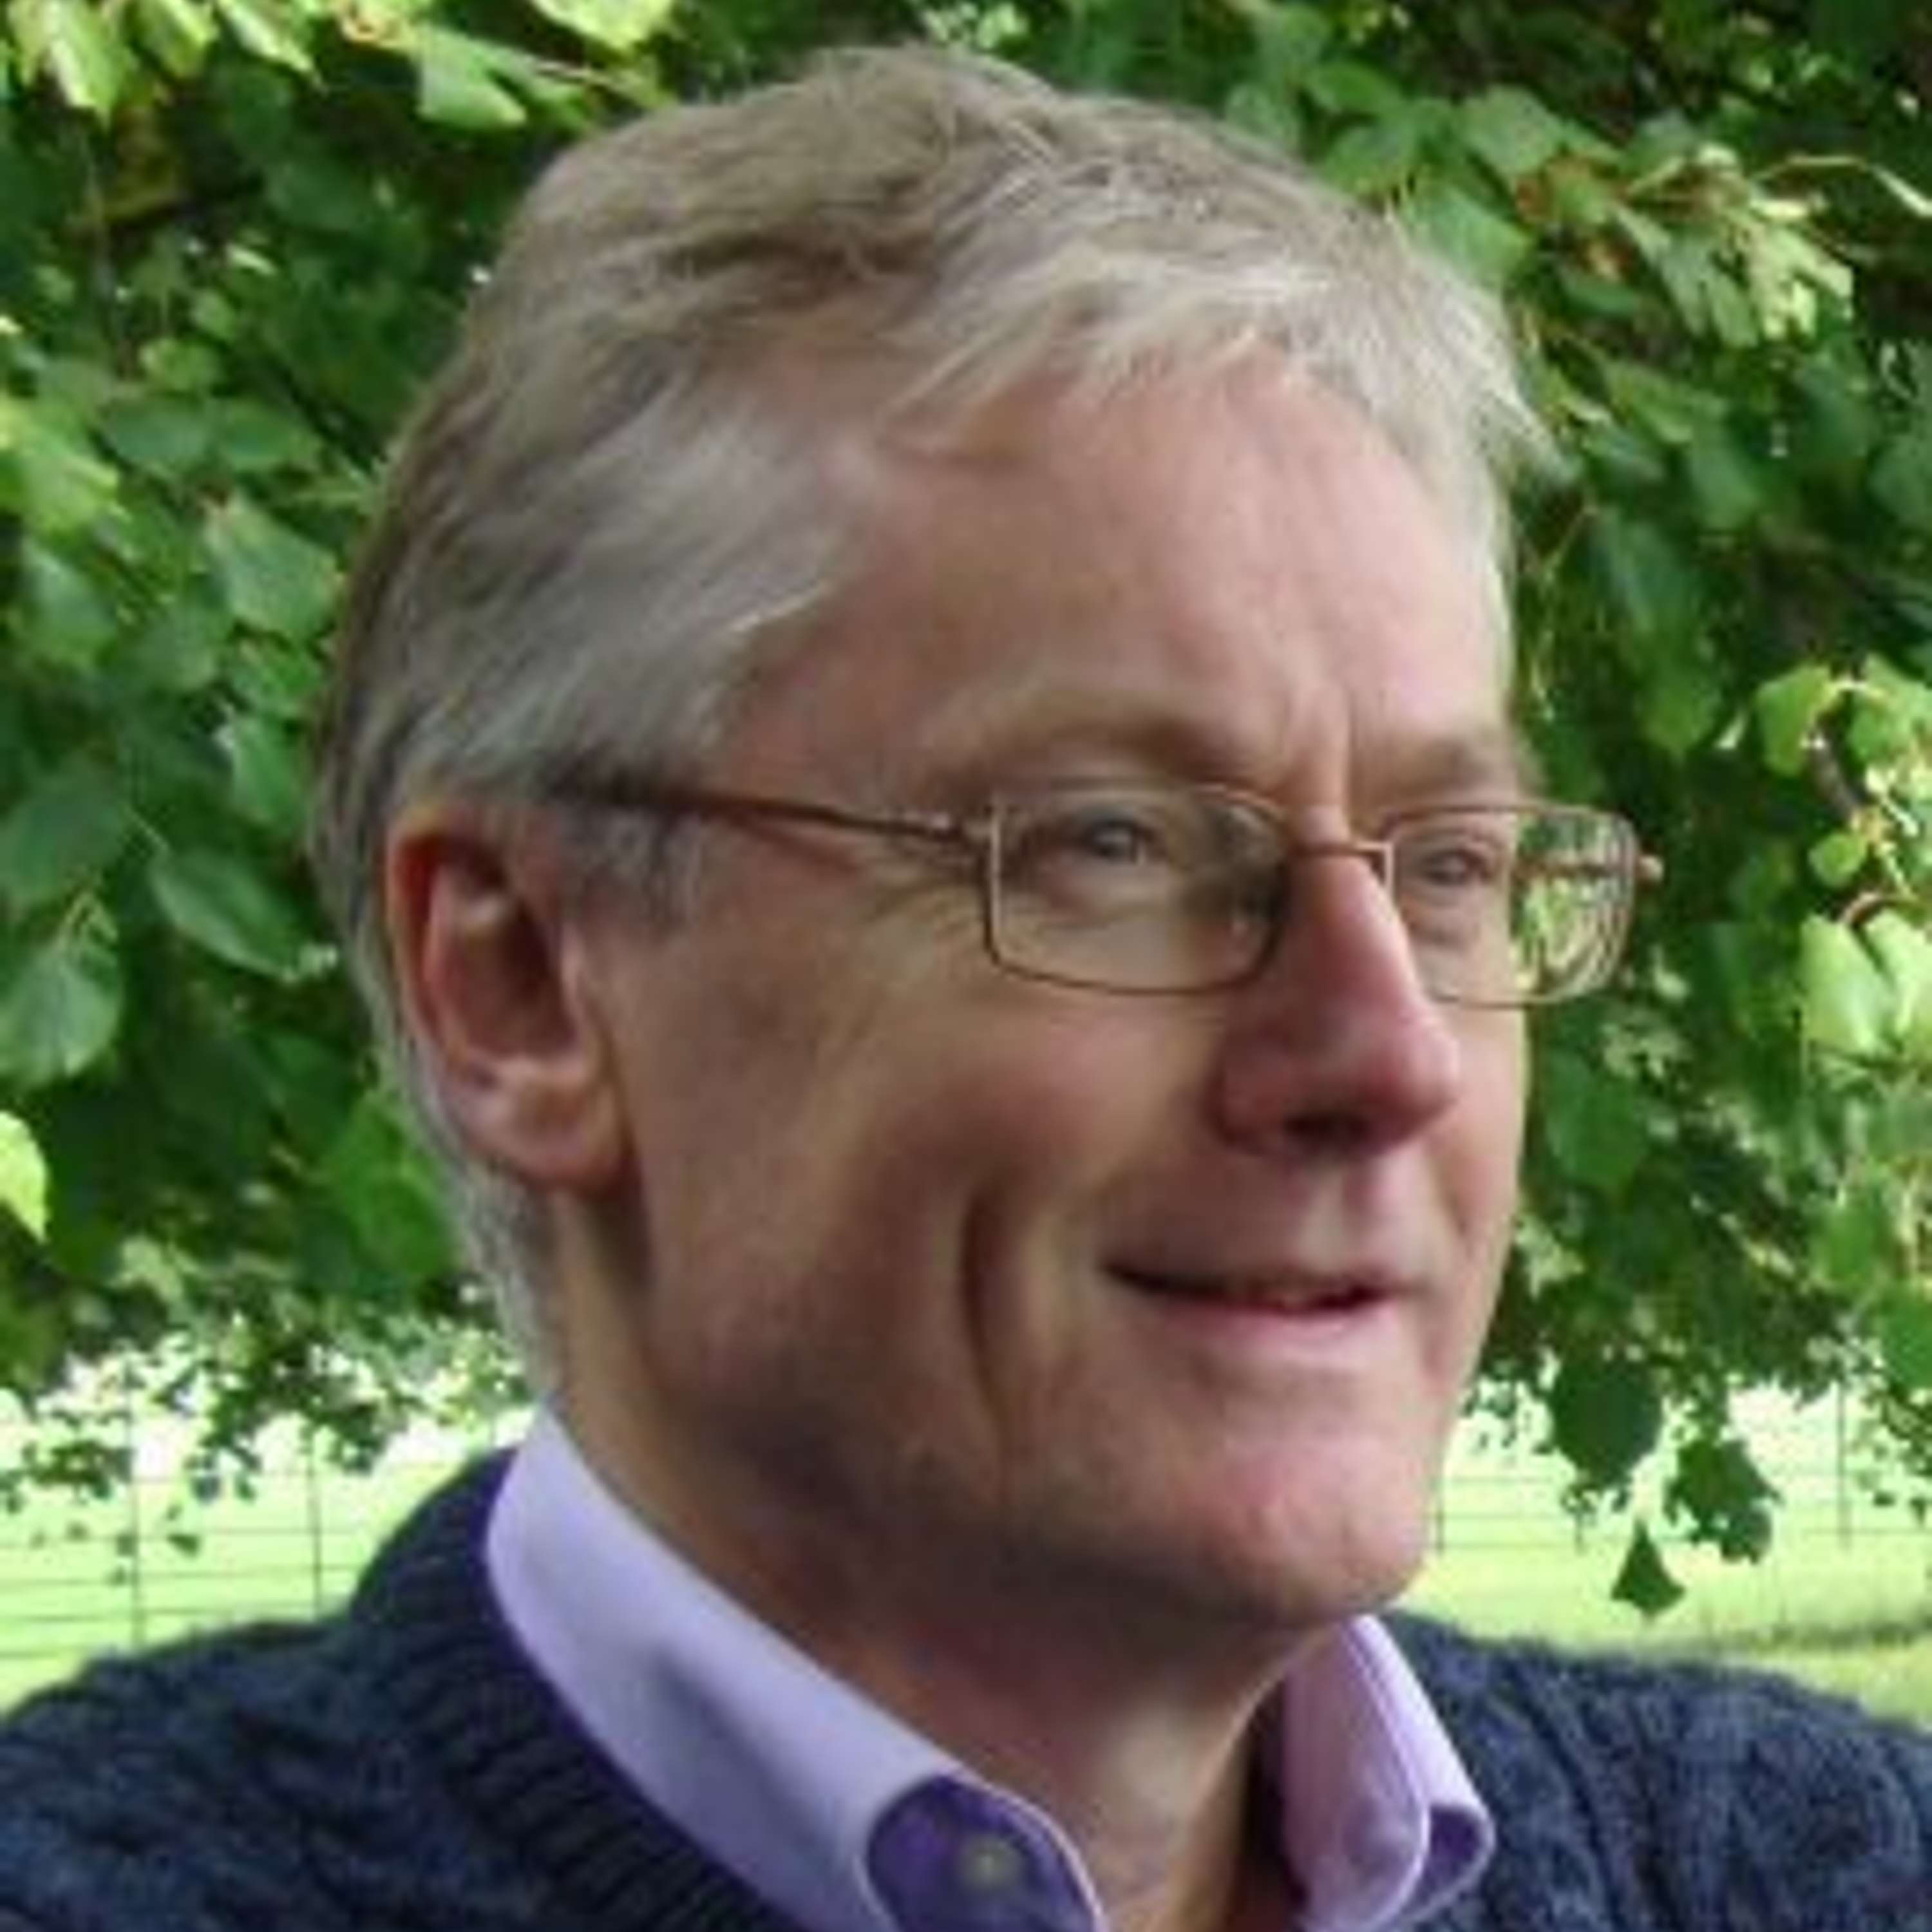 Episode 88: Interview with Professor Mike Hulme on the culture and politics of climate change